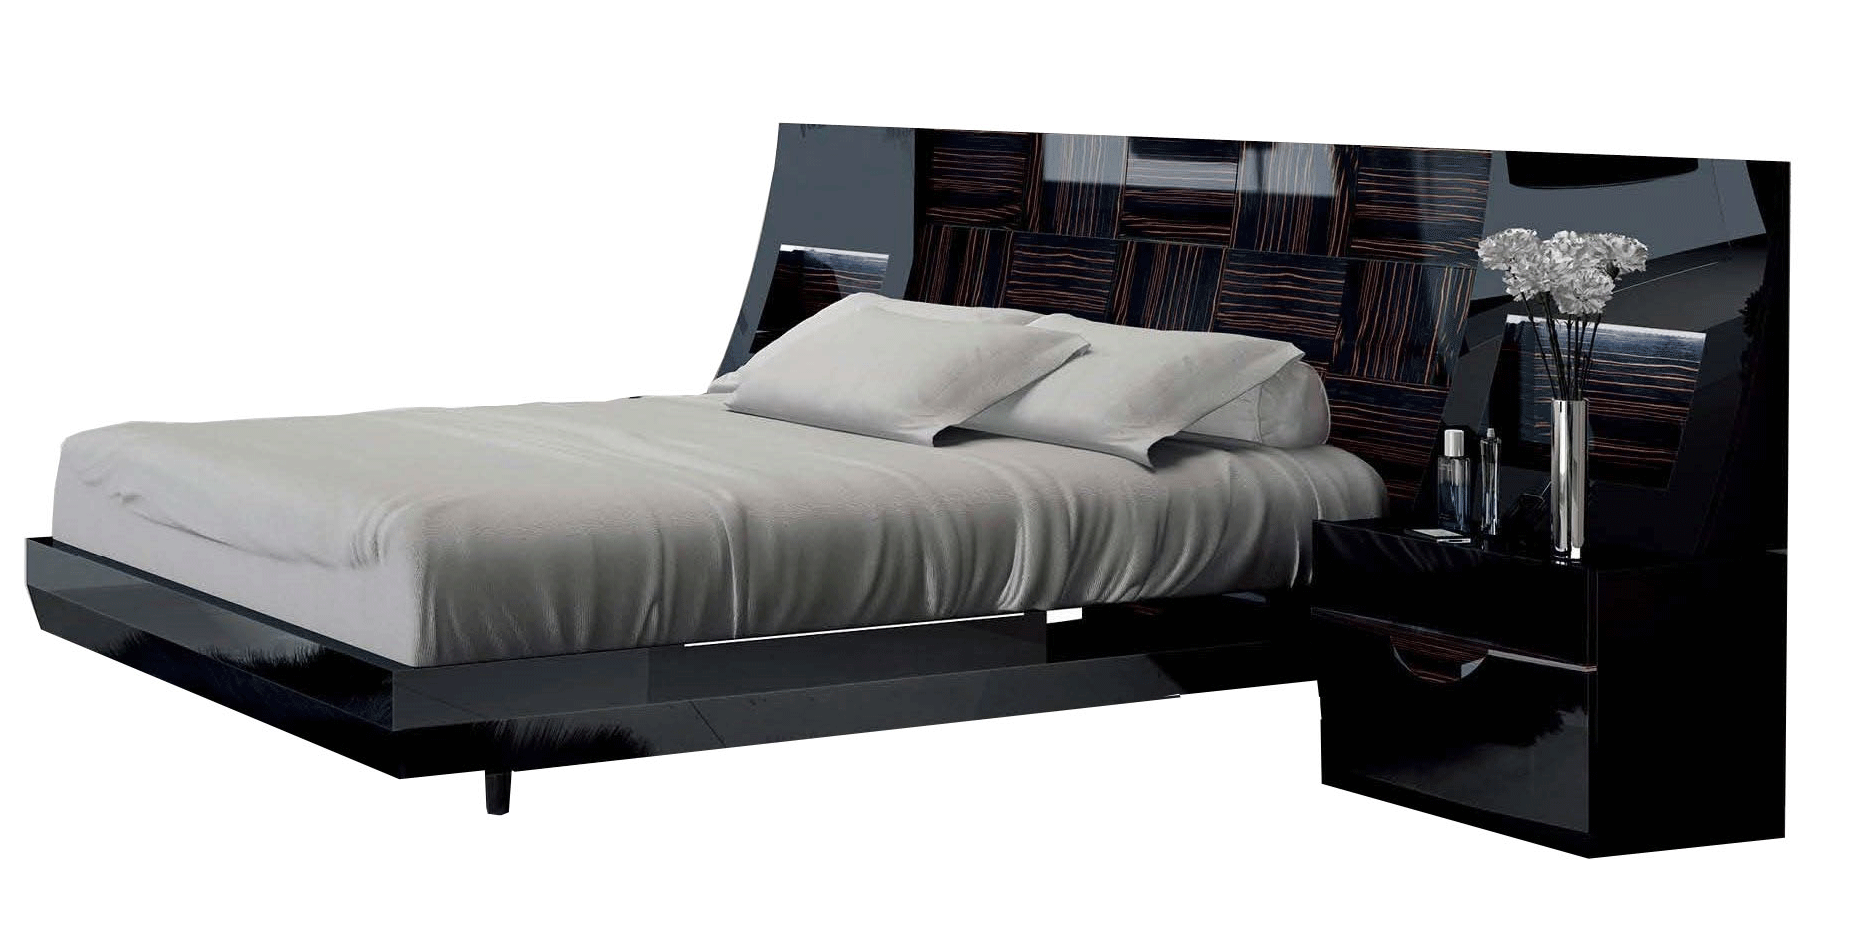 Brands Garcia Sabate REPLAY Marbella Bed QS bed ONLY